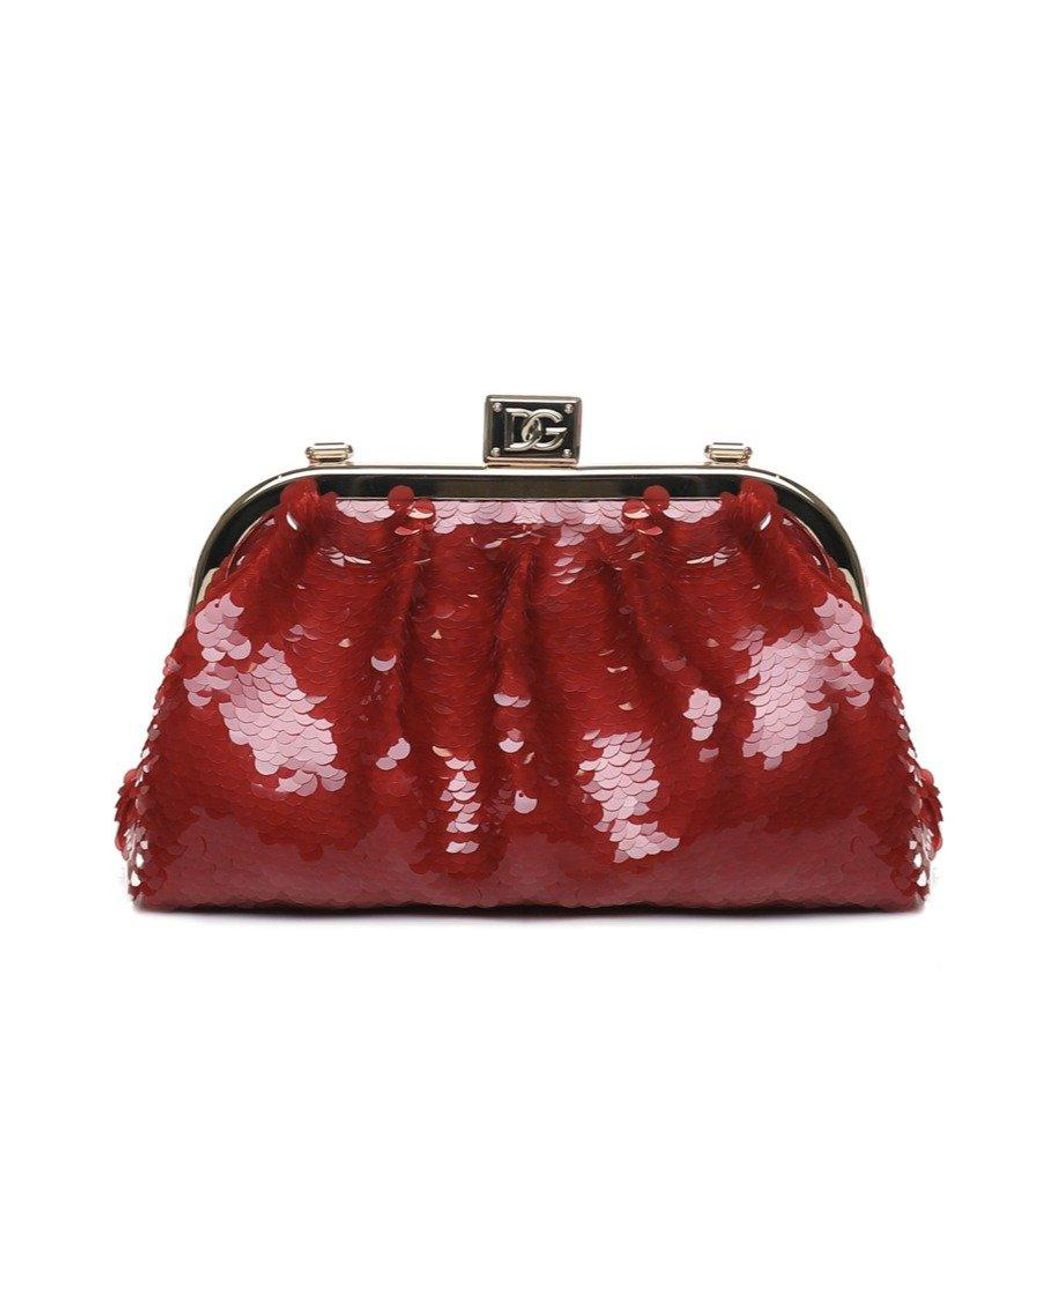 Red Beaded and Sequined Clutch Bag Evening Bags